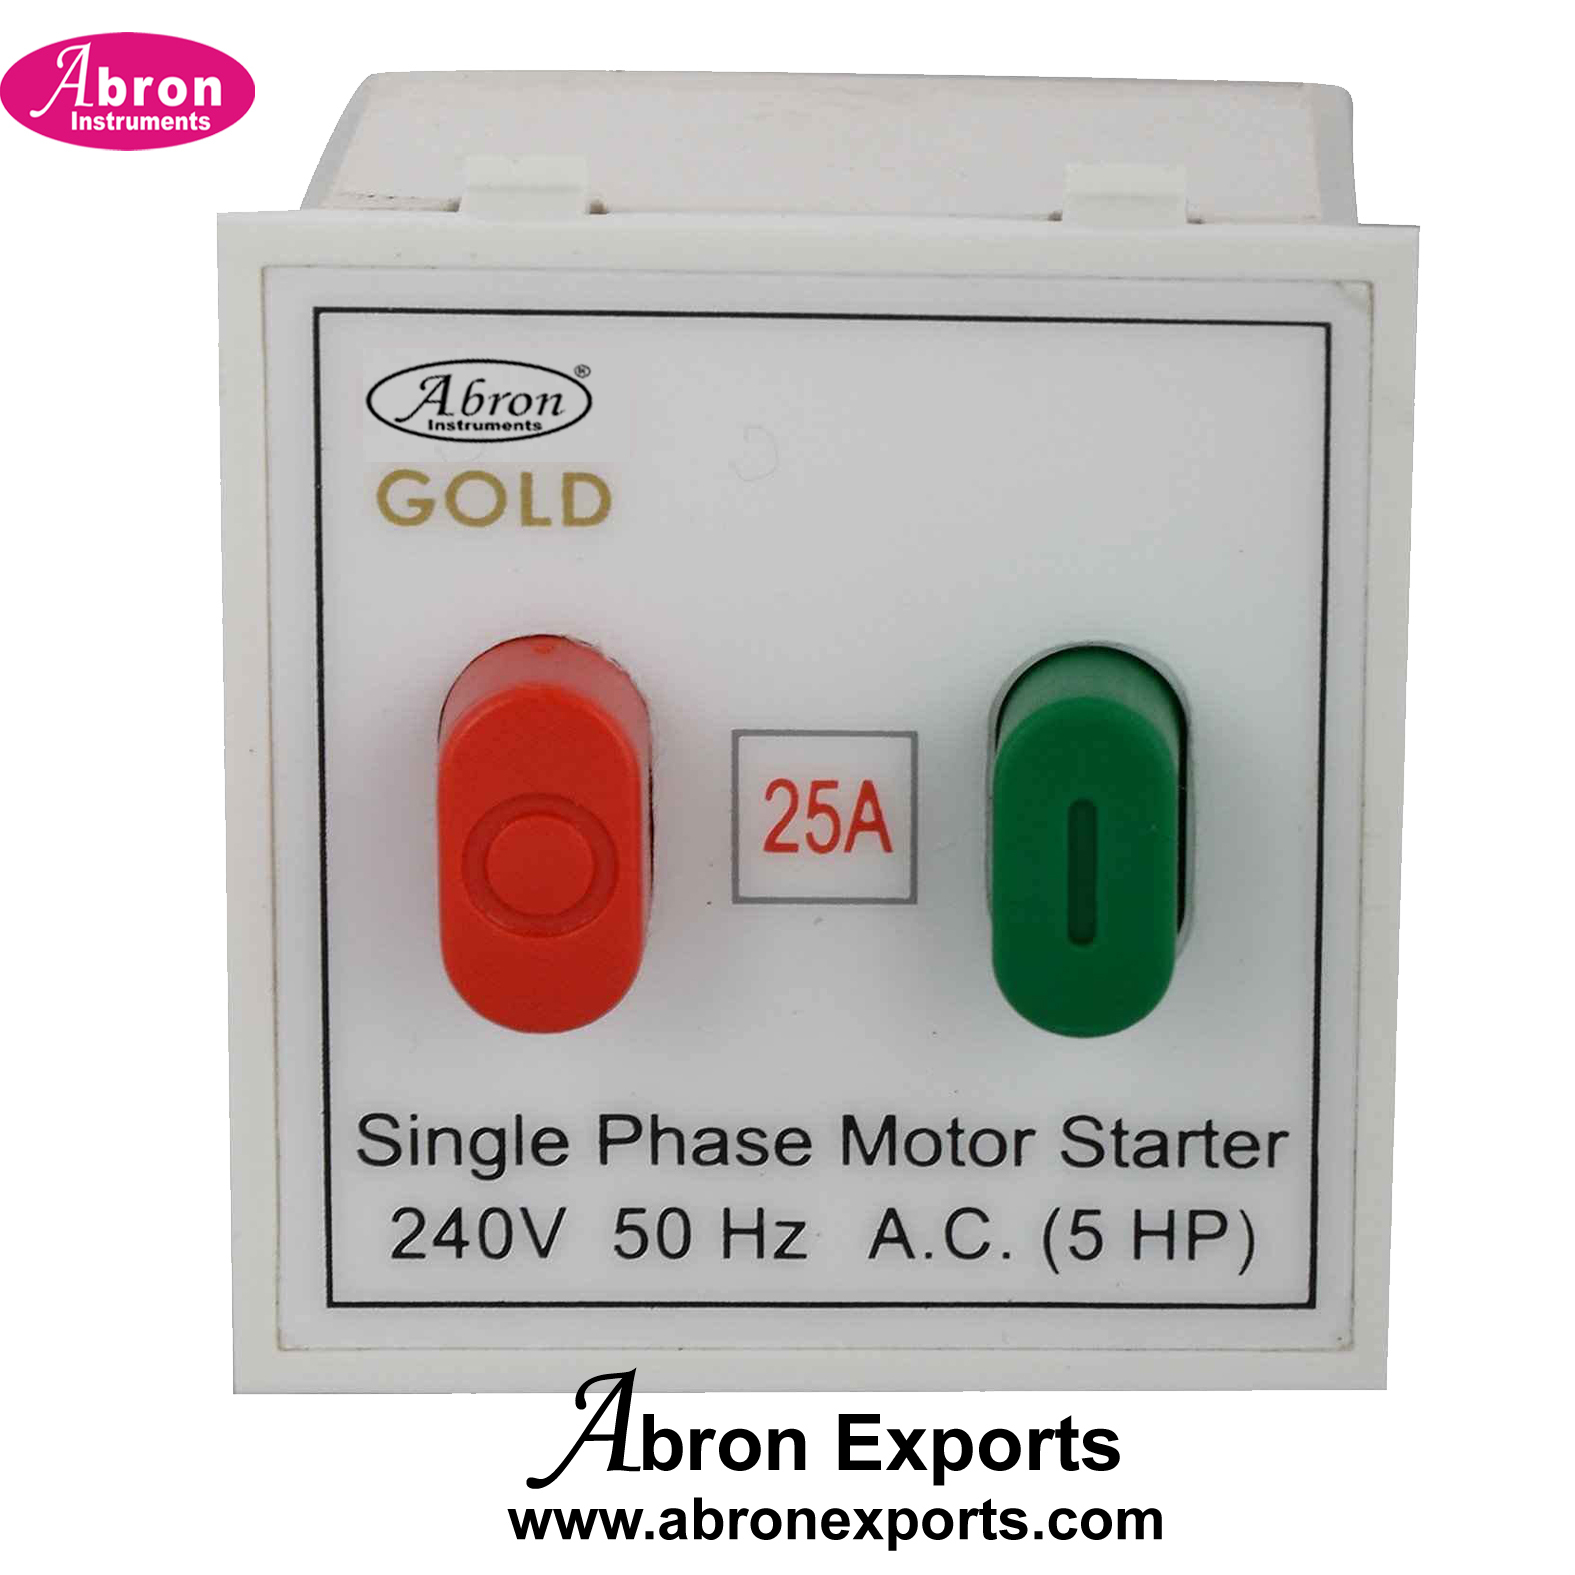 Starter for AC Motor Single Phase 5HP 123-21 Amp With Combination MaCH Relay And Start Stop Switch Abron AE-8463AC5A 